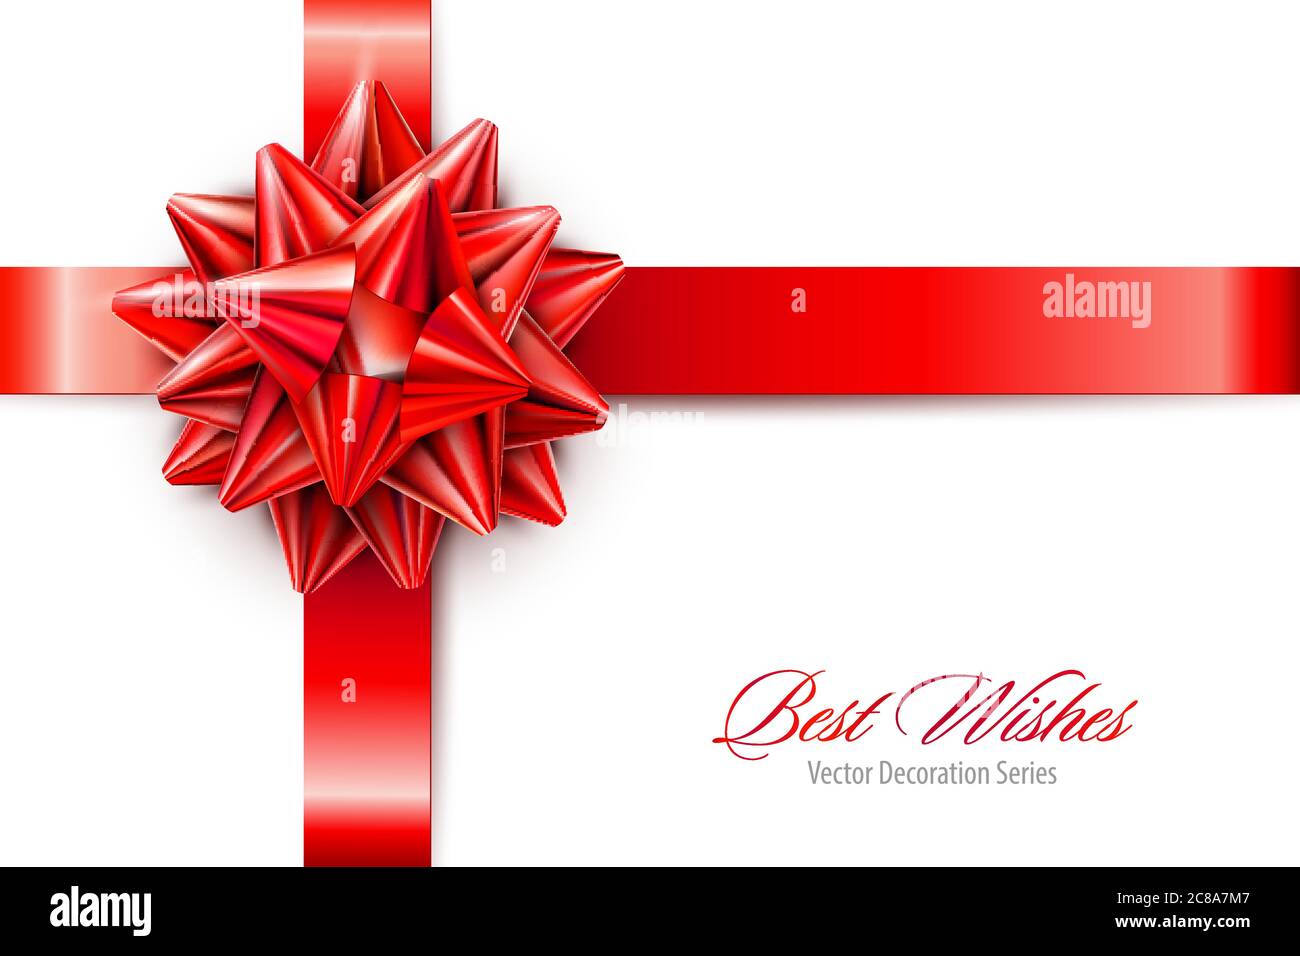 Vector Red Realistic Bow with Ribbons Isolated on White Background Stock Vector